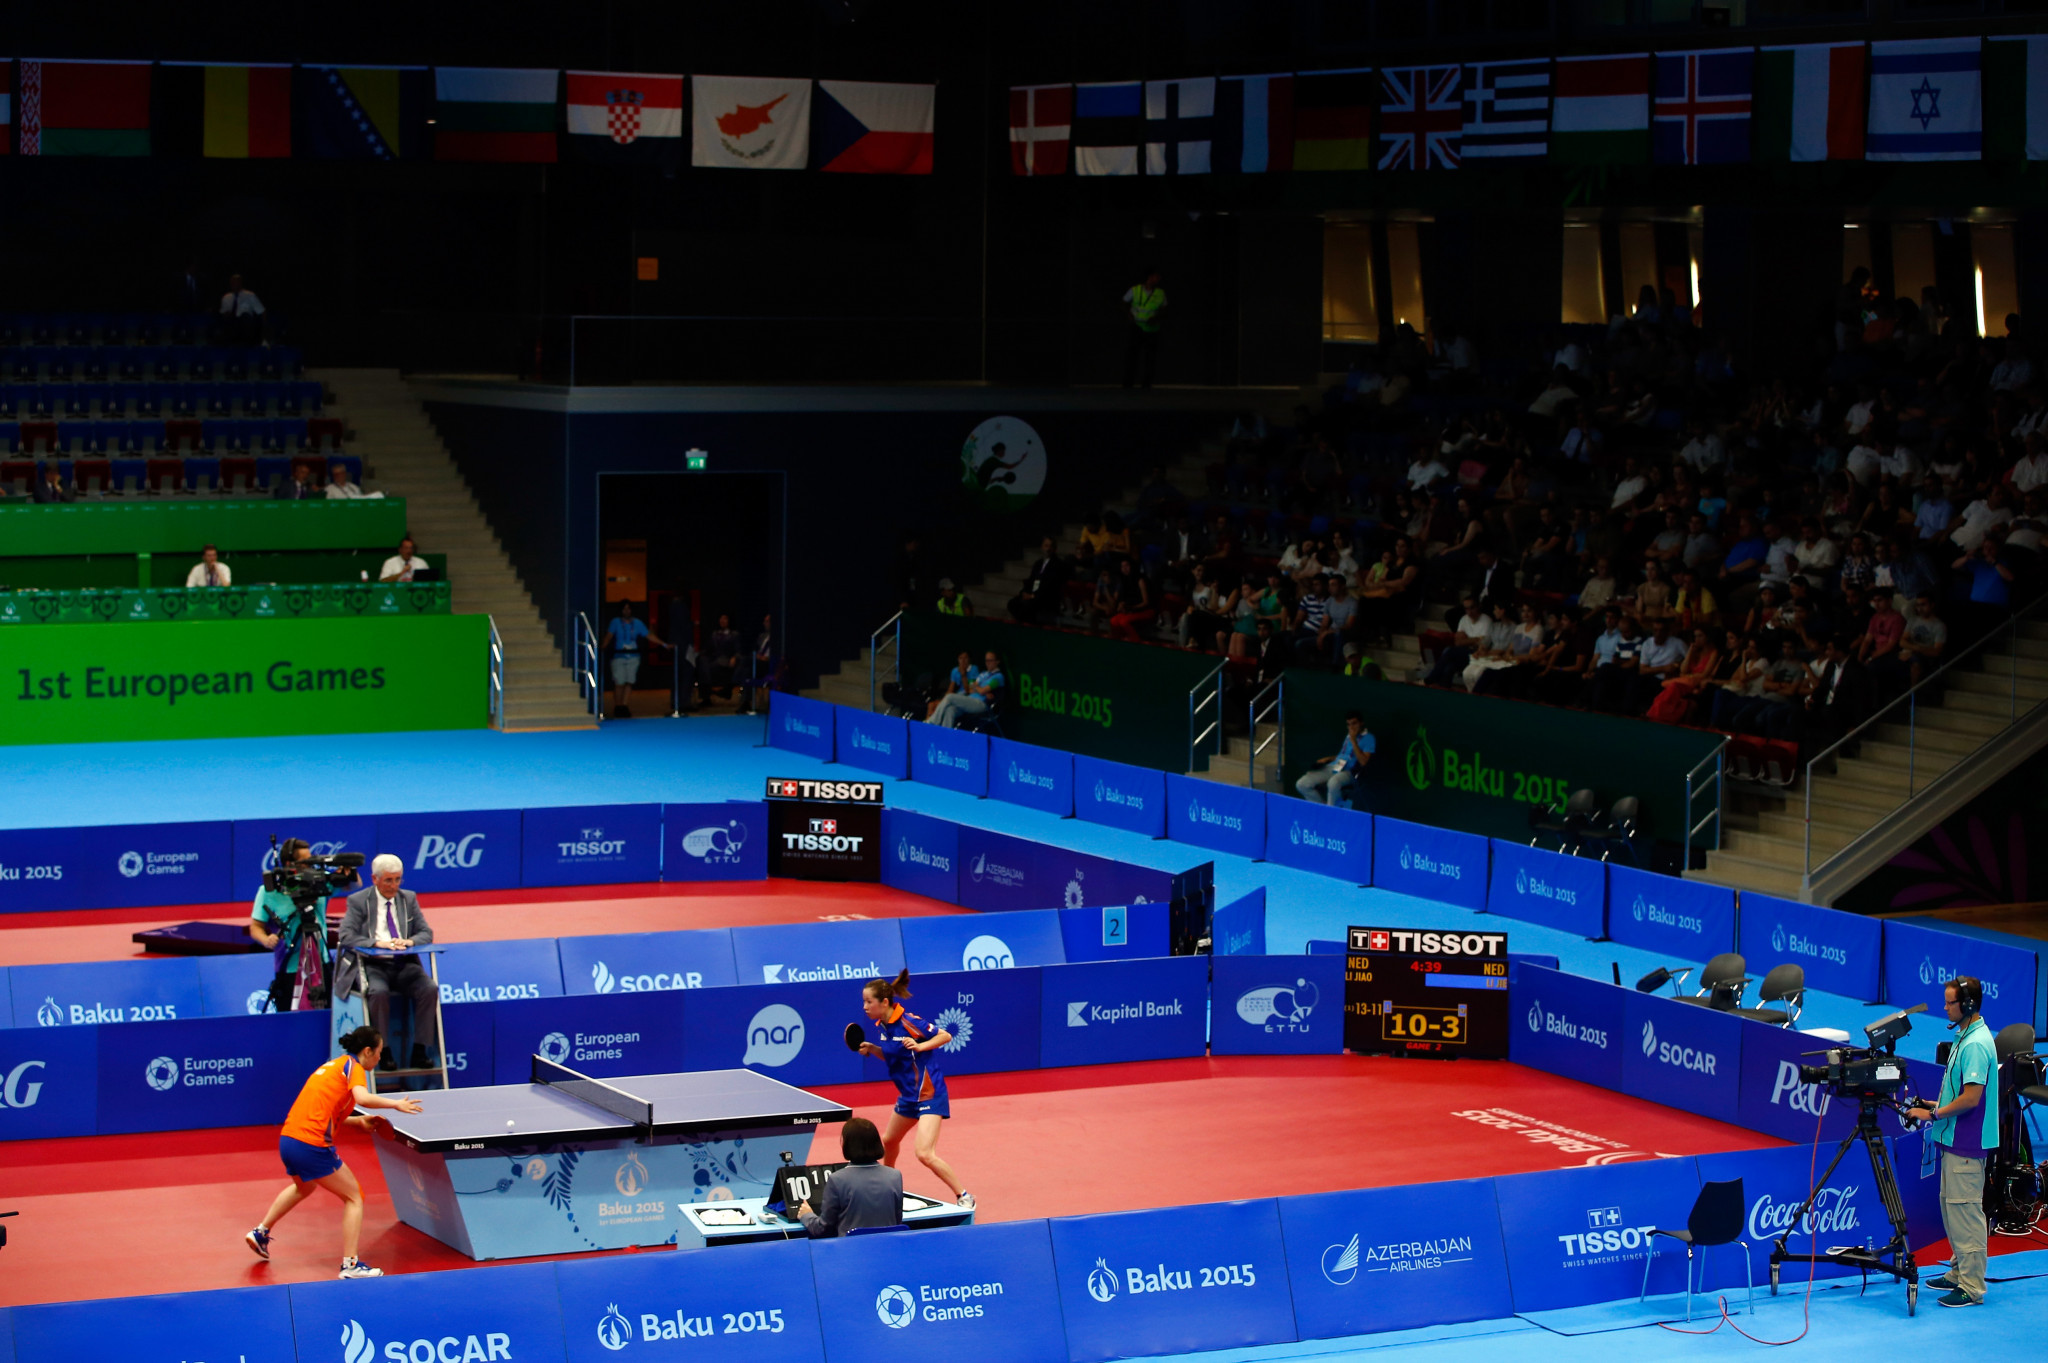 Table tennis was on the programme at the first European Games in Baku in 2015 ©Getty Images